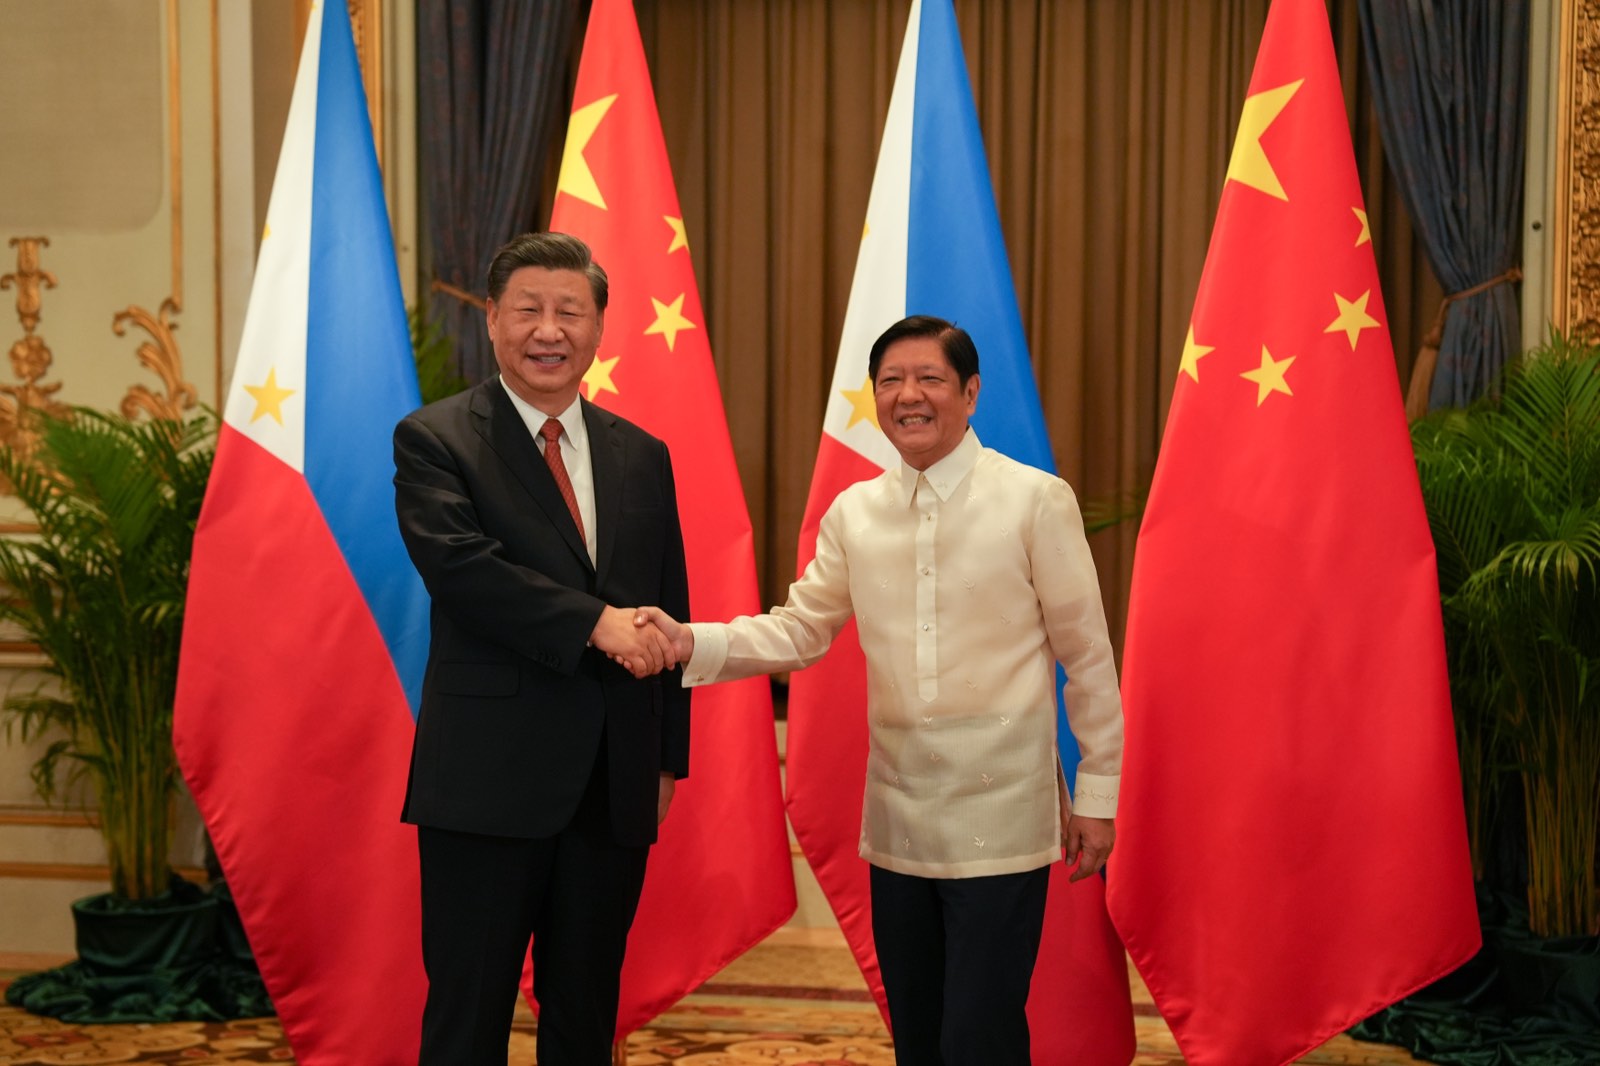 Philippine President Ferdinand Marcos Jr. and Chinese President Xi Jinping discussed regional issues, boosting bilateral ties, and the former’s plans for his state visit to China.